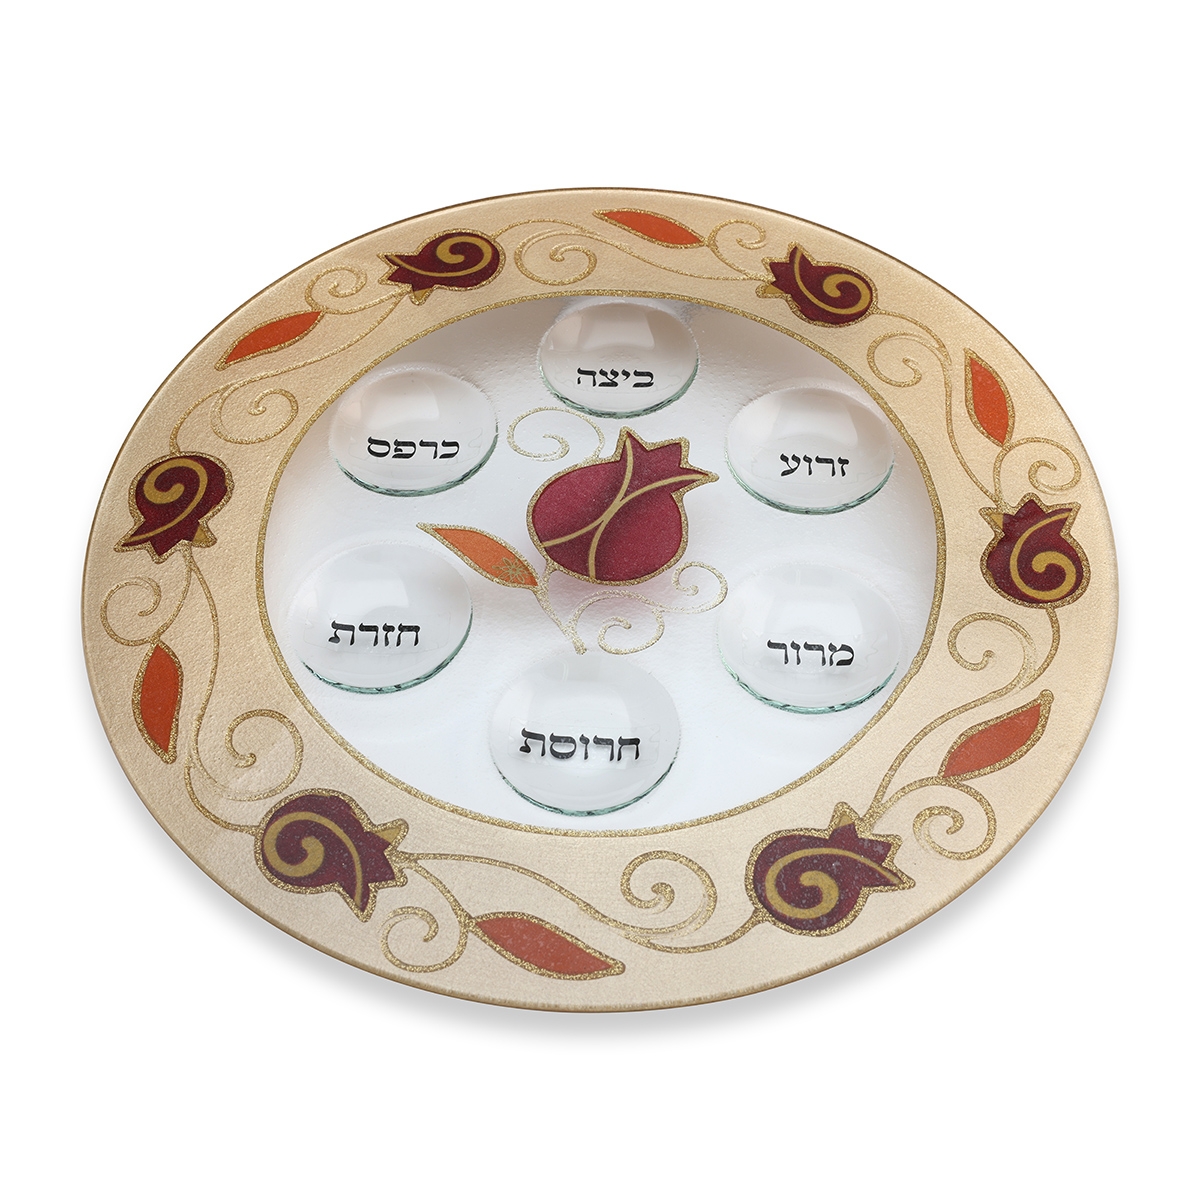 Glass Seder Plate With Hand Painted Pomegranates Design By Lily Art (Red) - 1